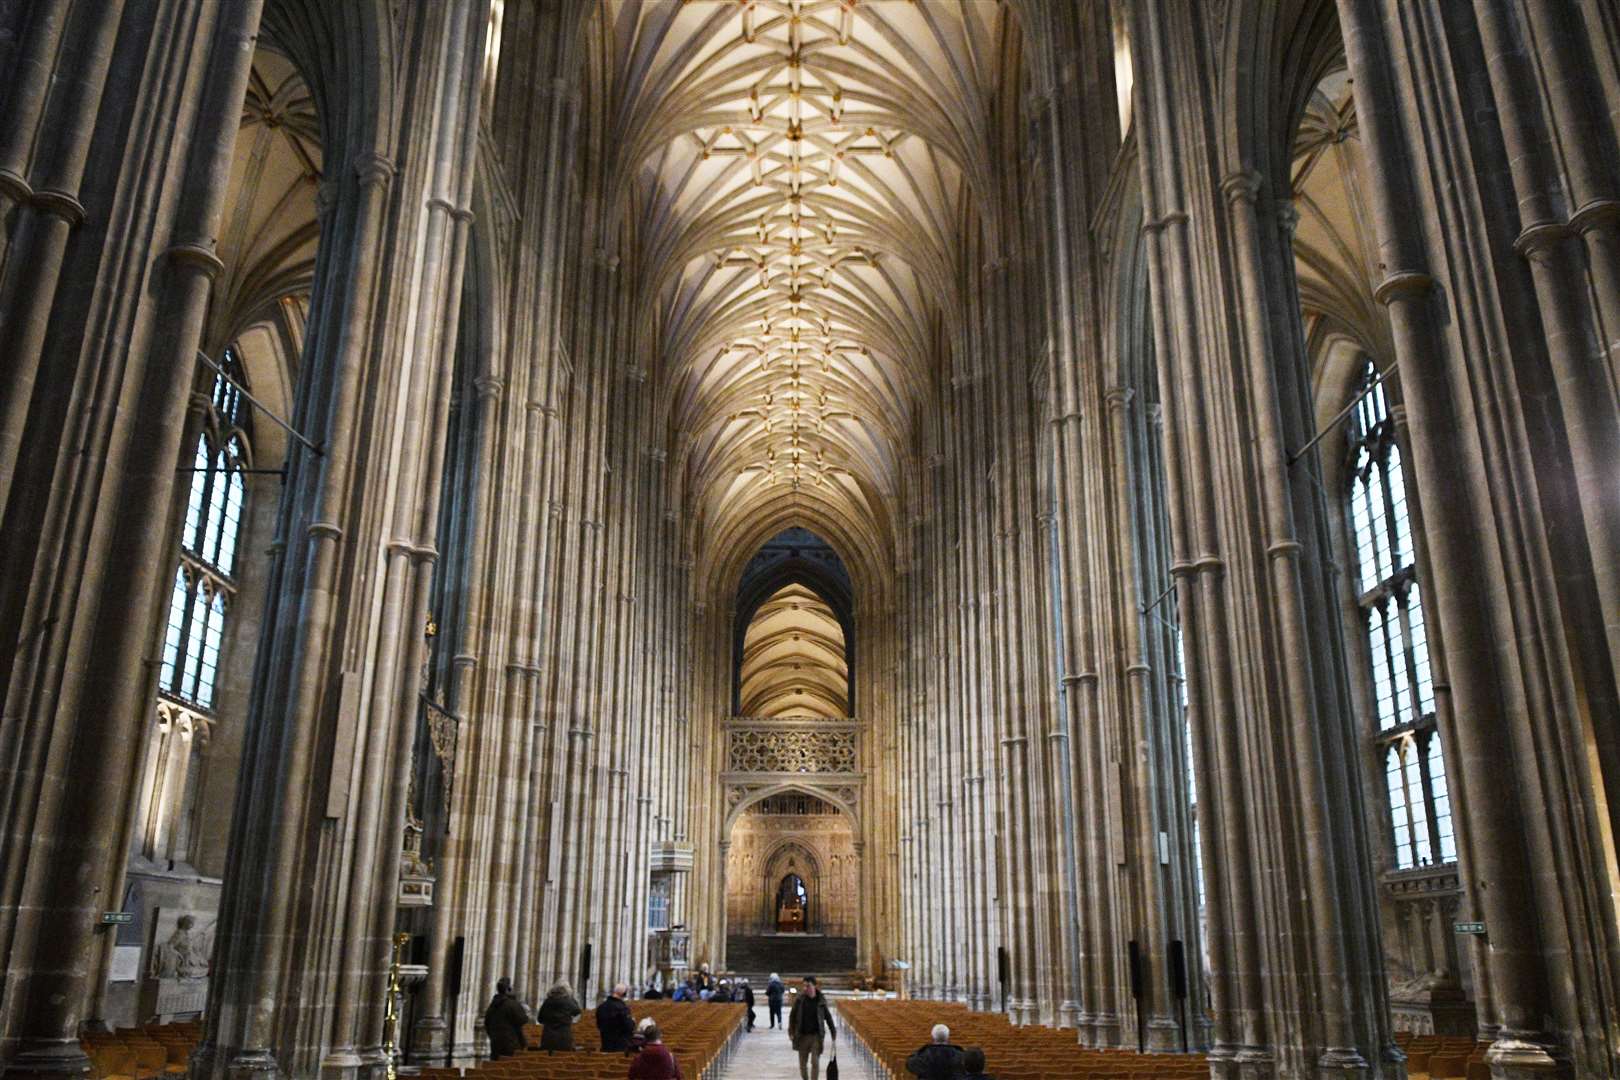 The baton's route through Canterbury will finish with an event at the iconic Cathedral